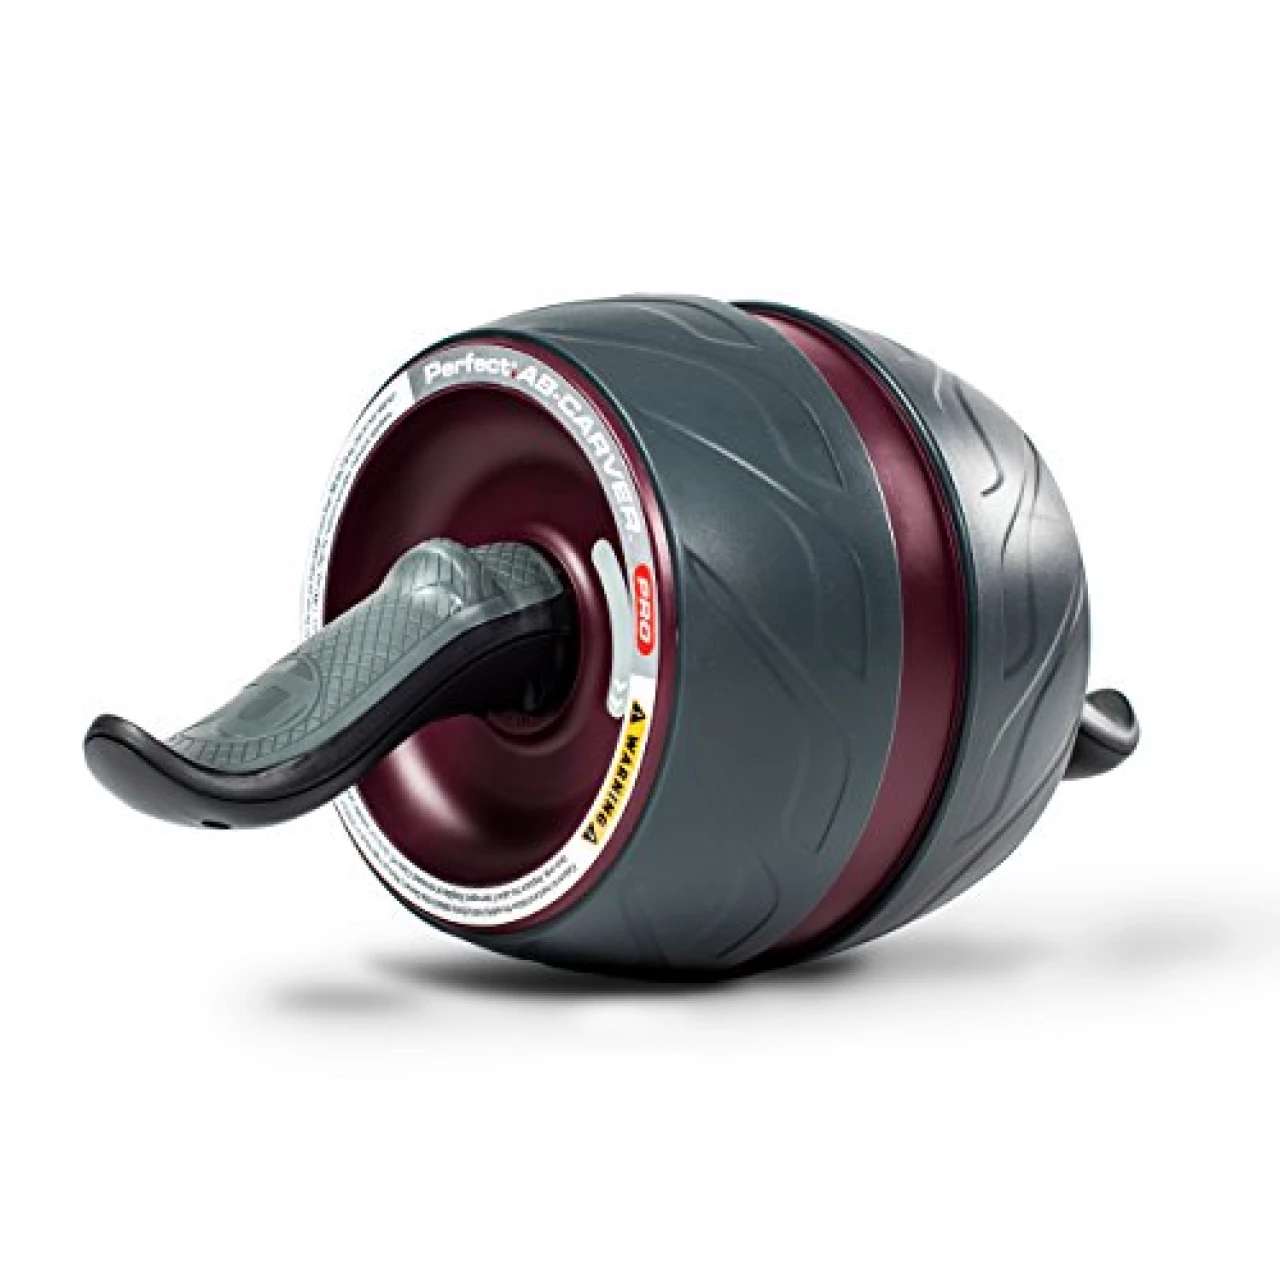 Perfect Fitness Ab Carver Pro Roller Wheel With Built In Spring Resistance, At Home Core Workout Equipment, Red